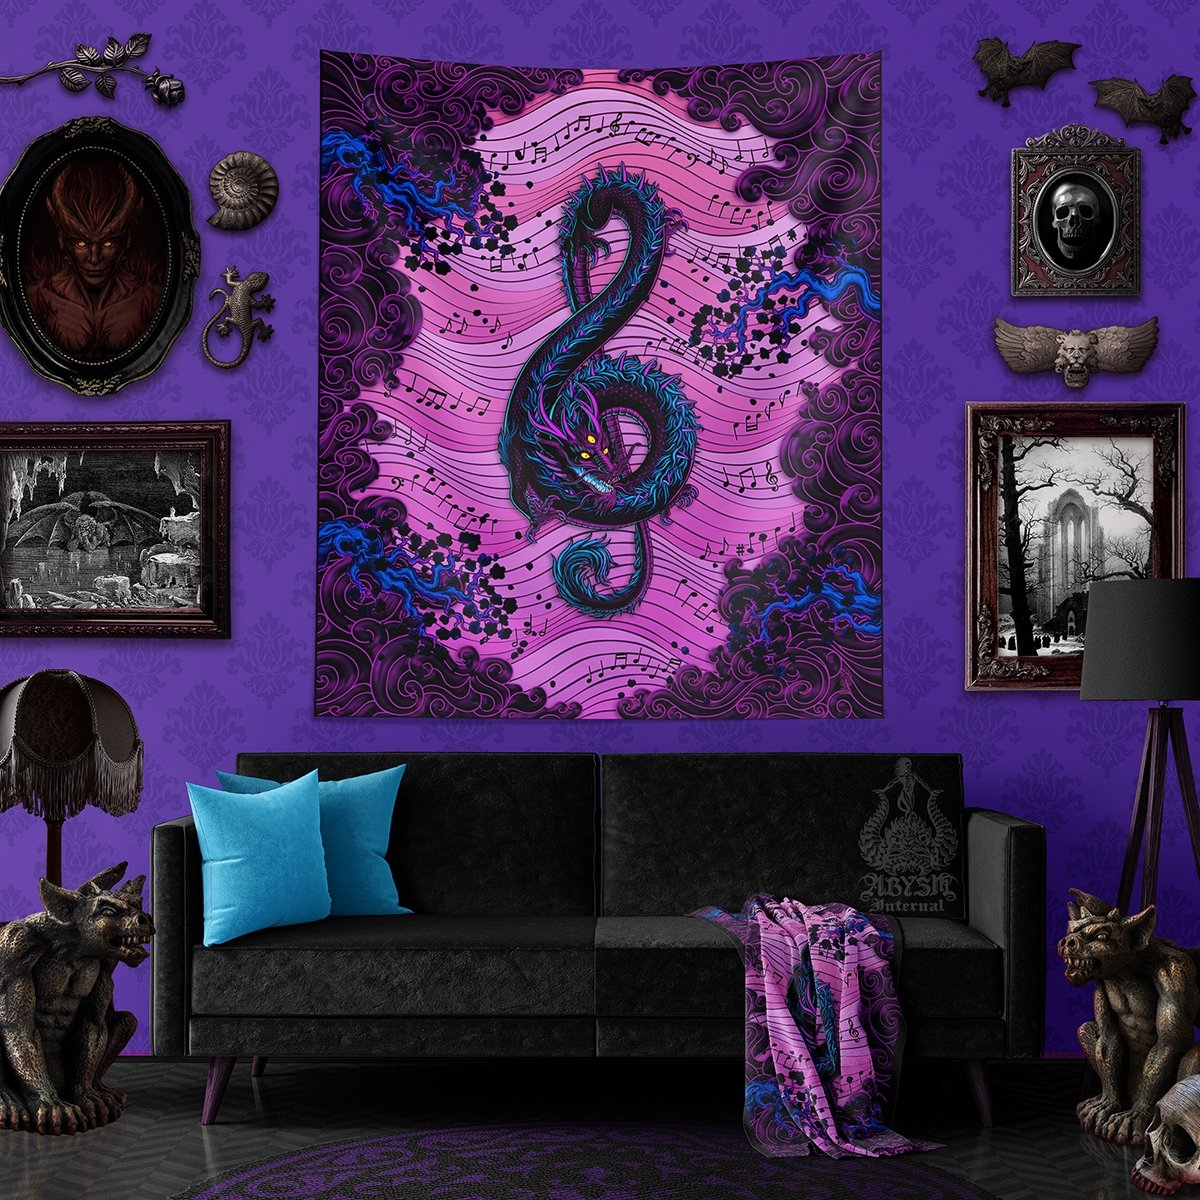 Pastel Goth Tapestry, Music Wall Hanging, Psychedelic Home Decor, Art Print - Dragon, Treble Clef - Abysm Internal